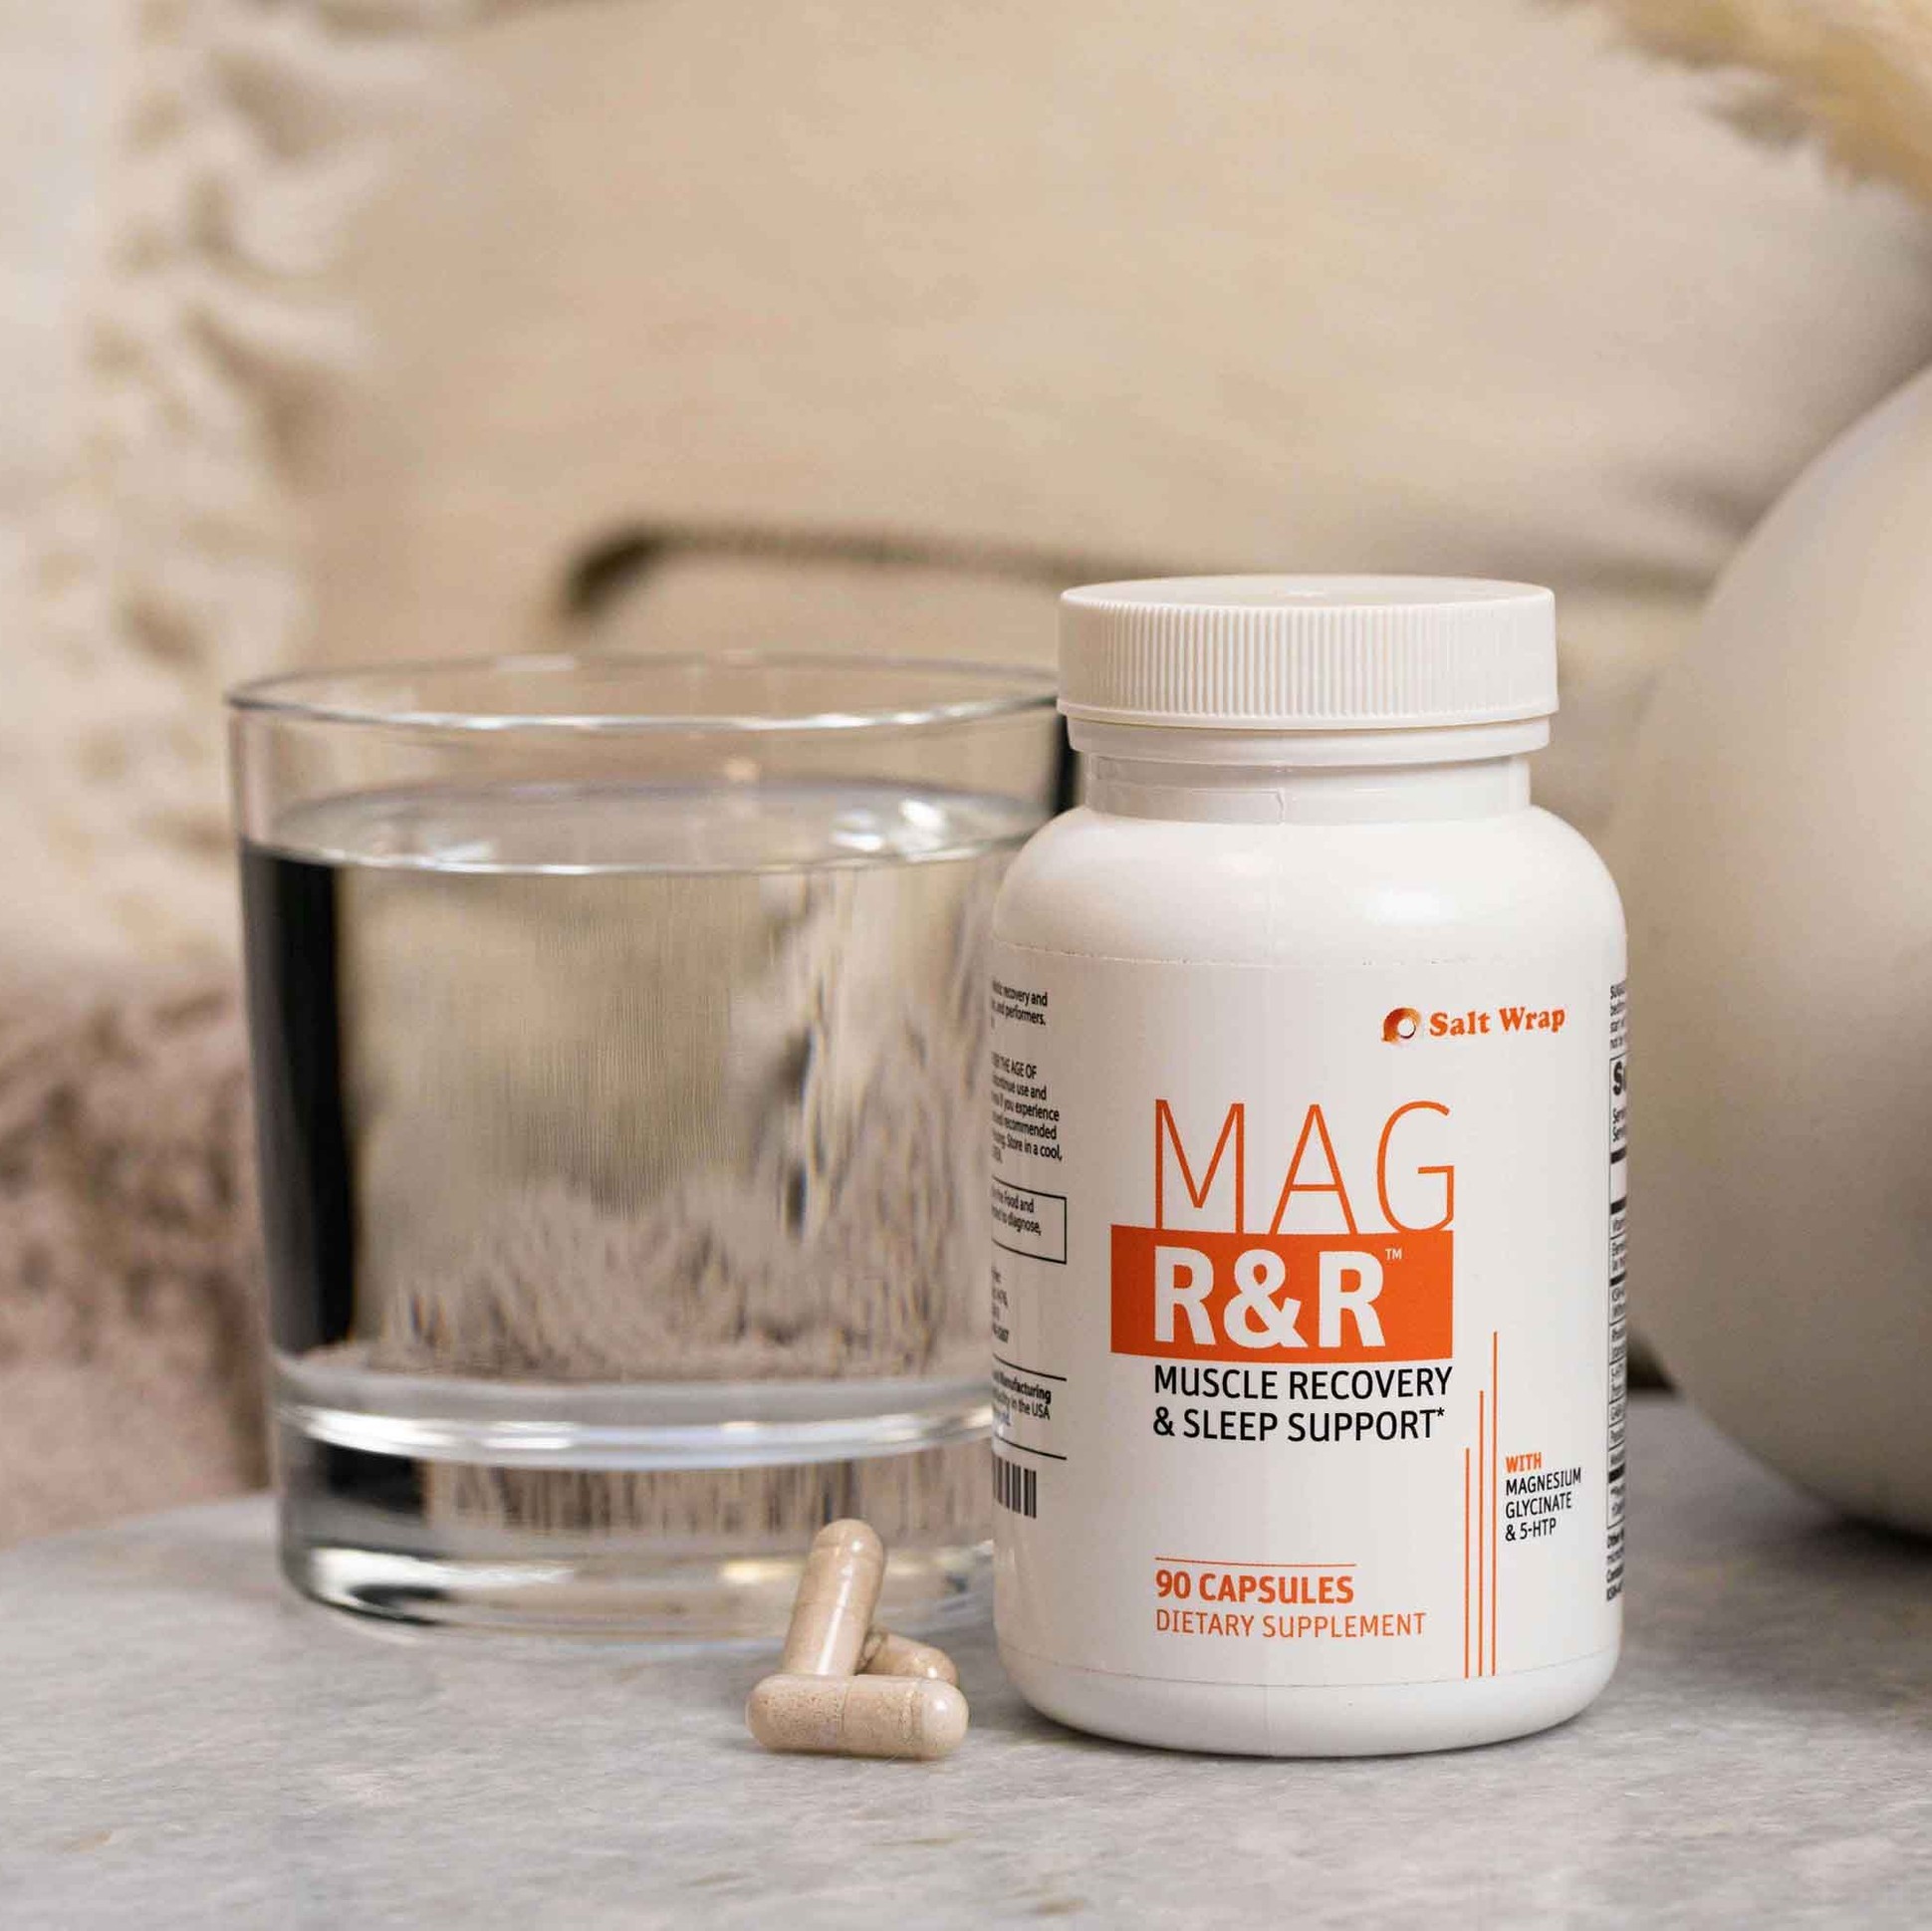 Mag R&R™ is formulated to help put an end to nighttime leg and muscle cramps – while supporting maximum recovery and relaxation.